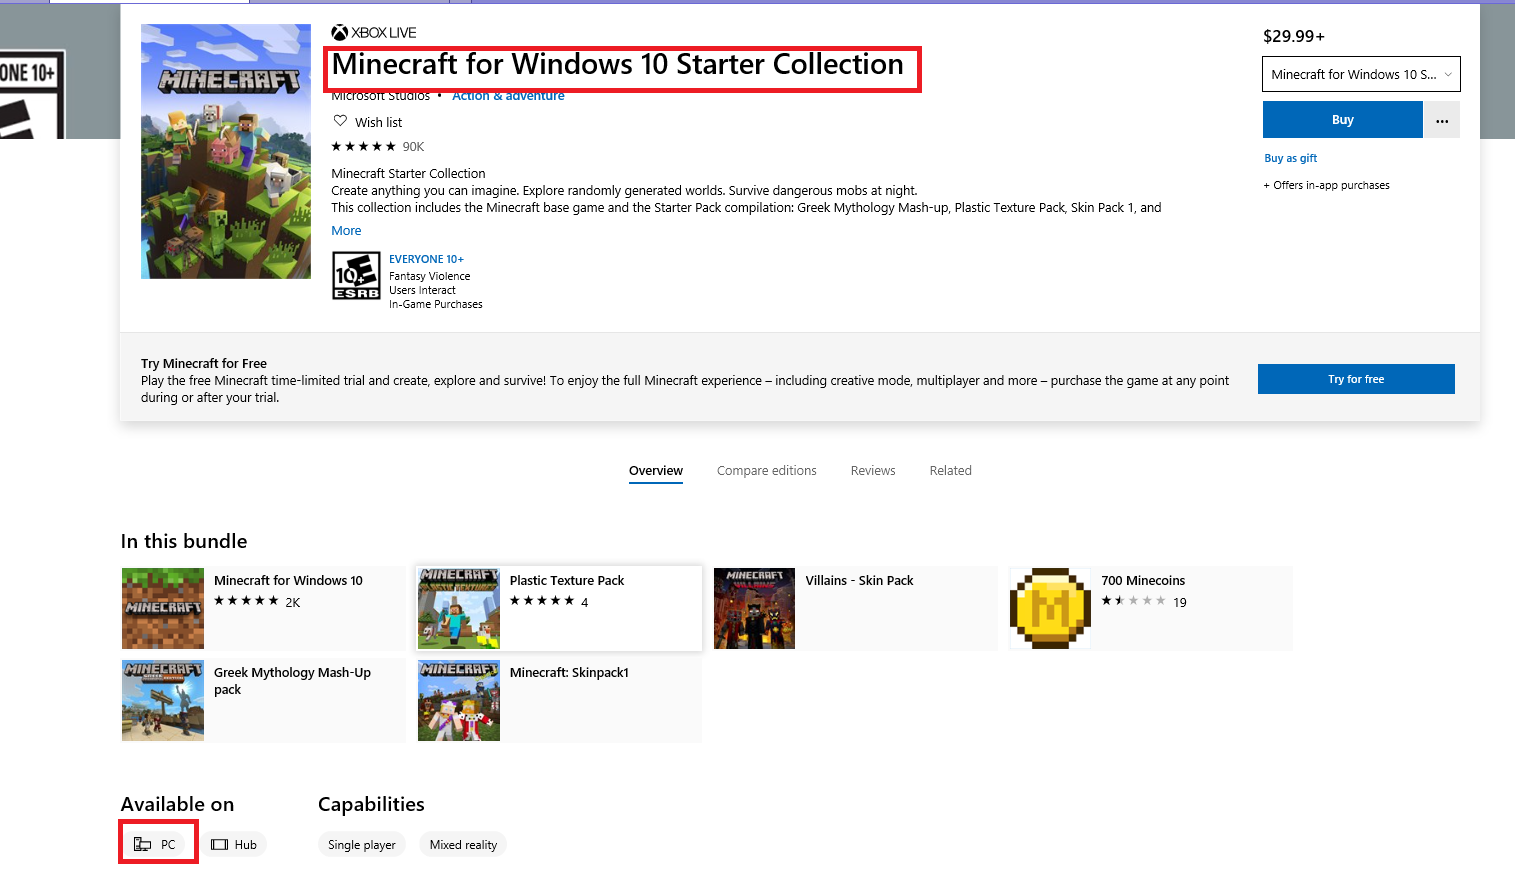 I cant download the Minecraft windows 10 starter Collection even though it is the PC one 3786f464-ee7e-4458-88e7-56128929293b?upload=true.png